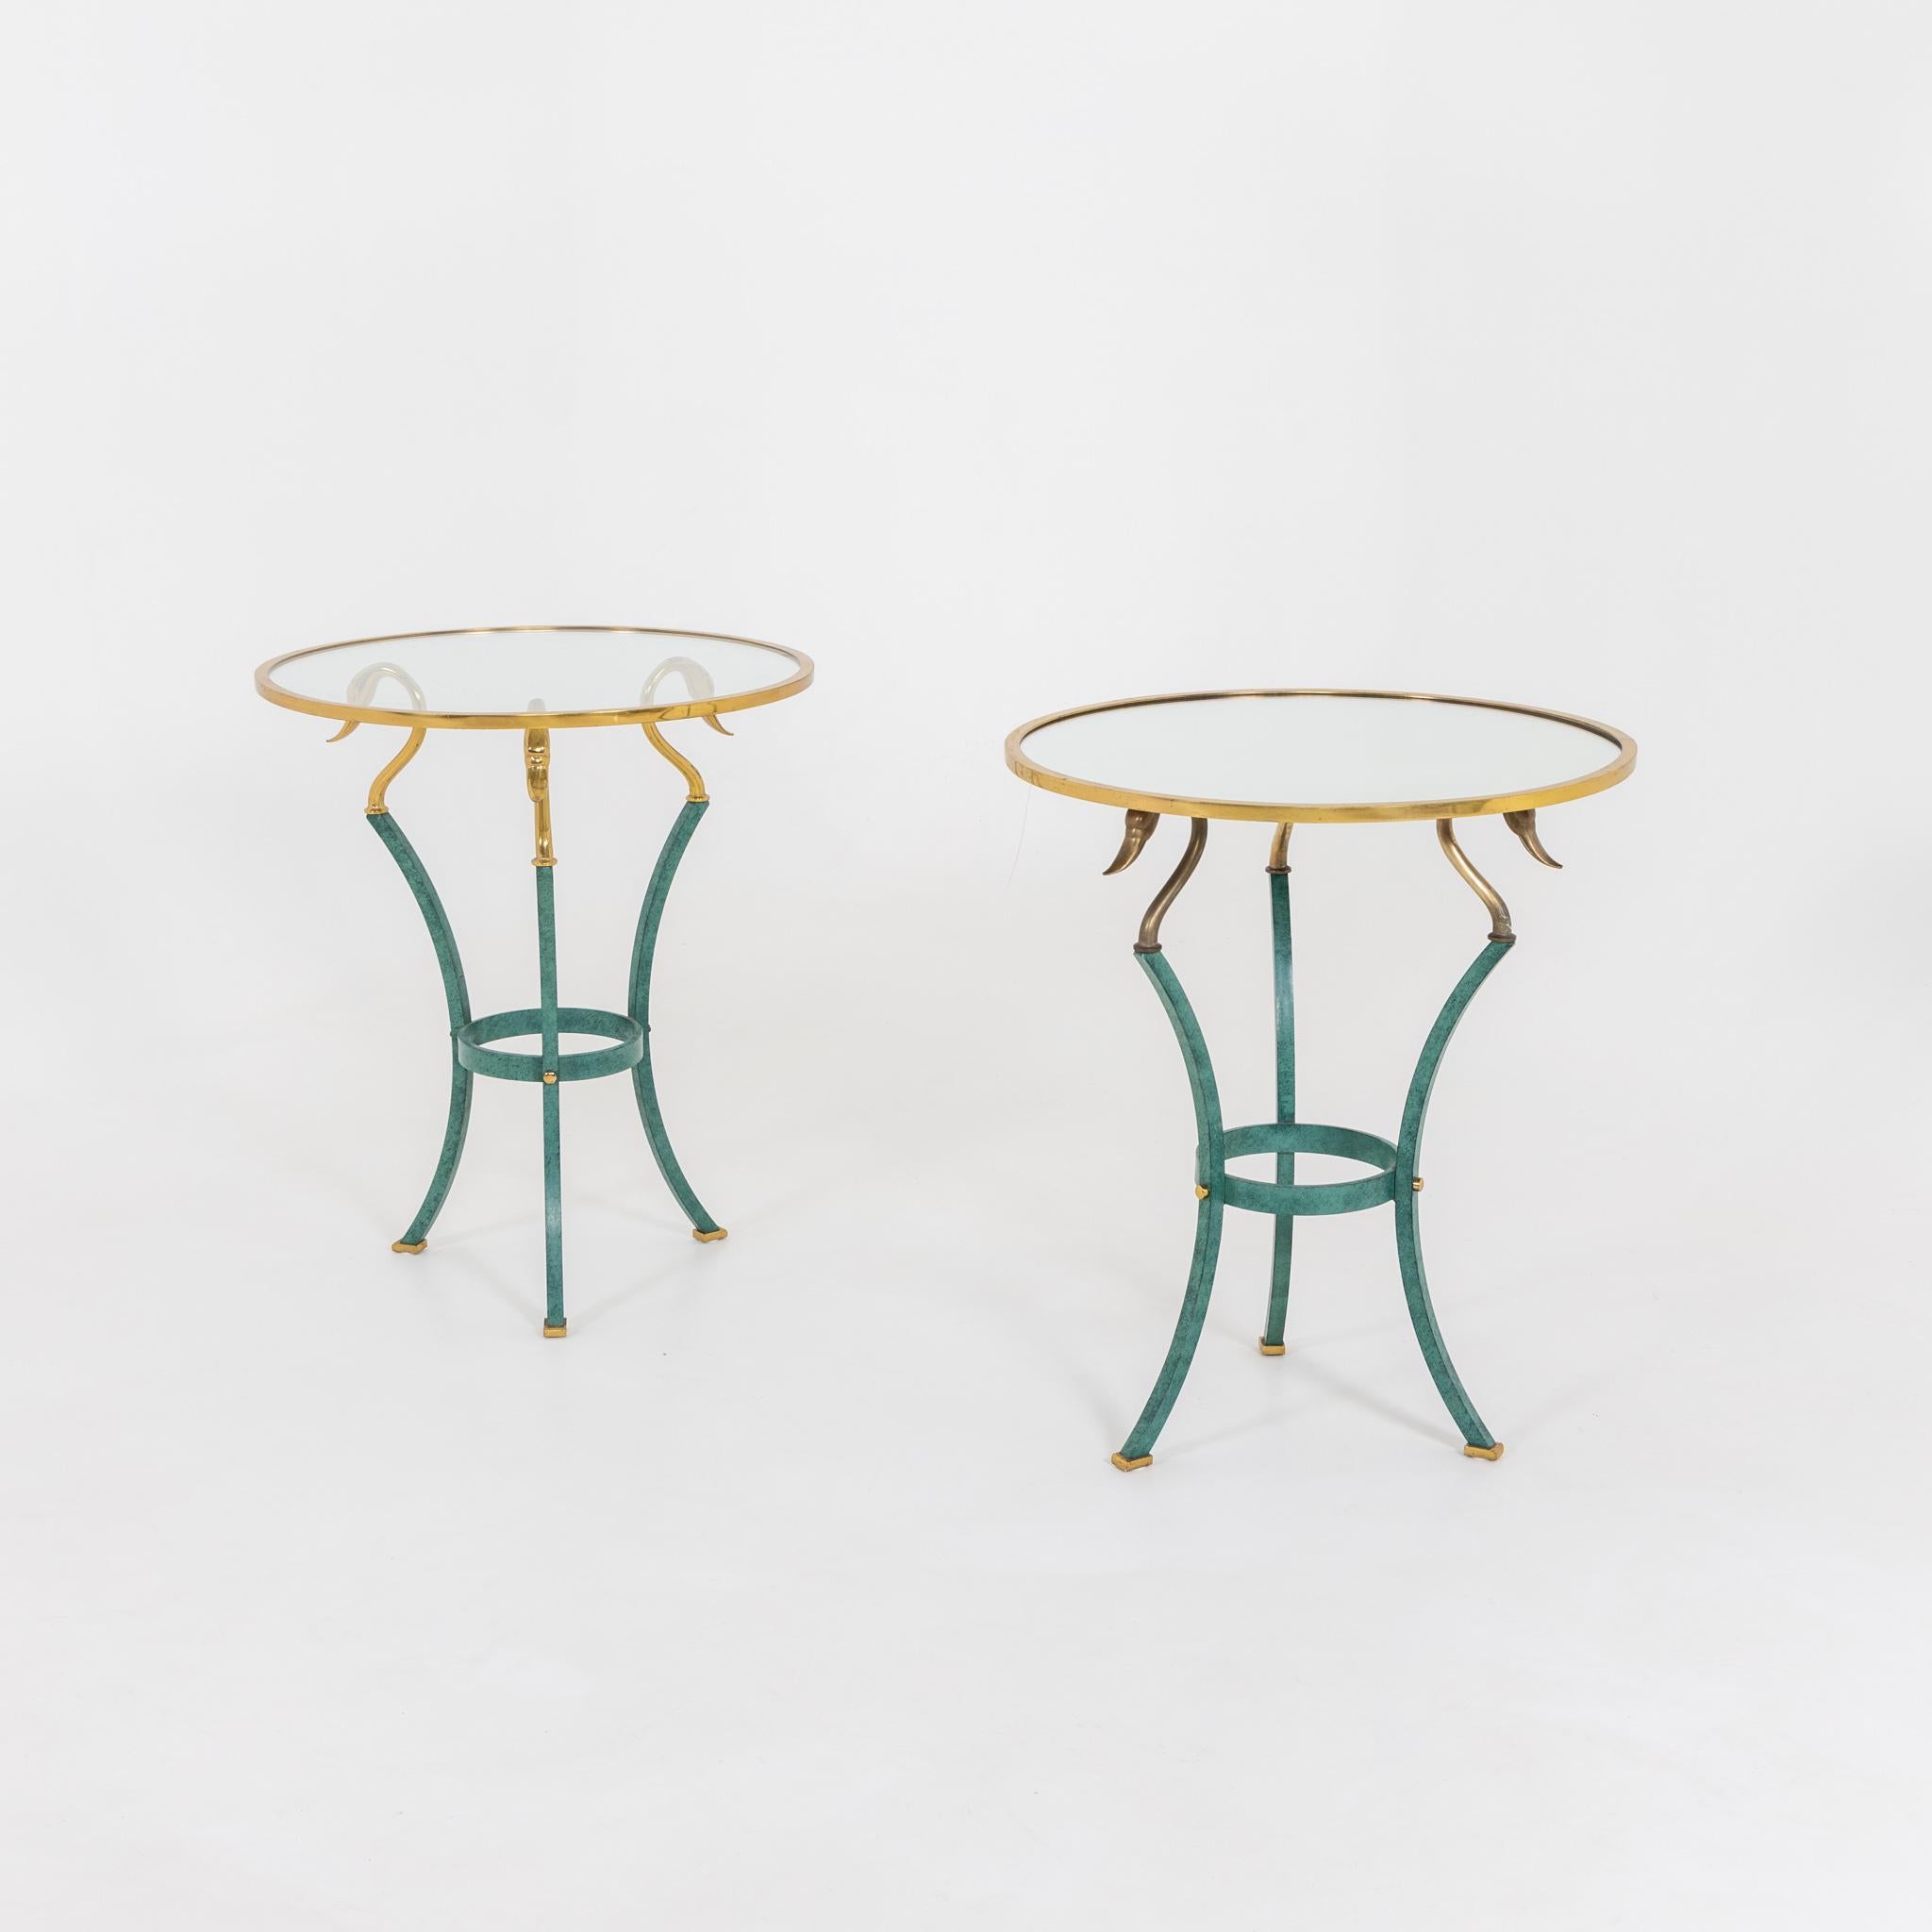 European Pair of Side Tables, 1980s